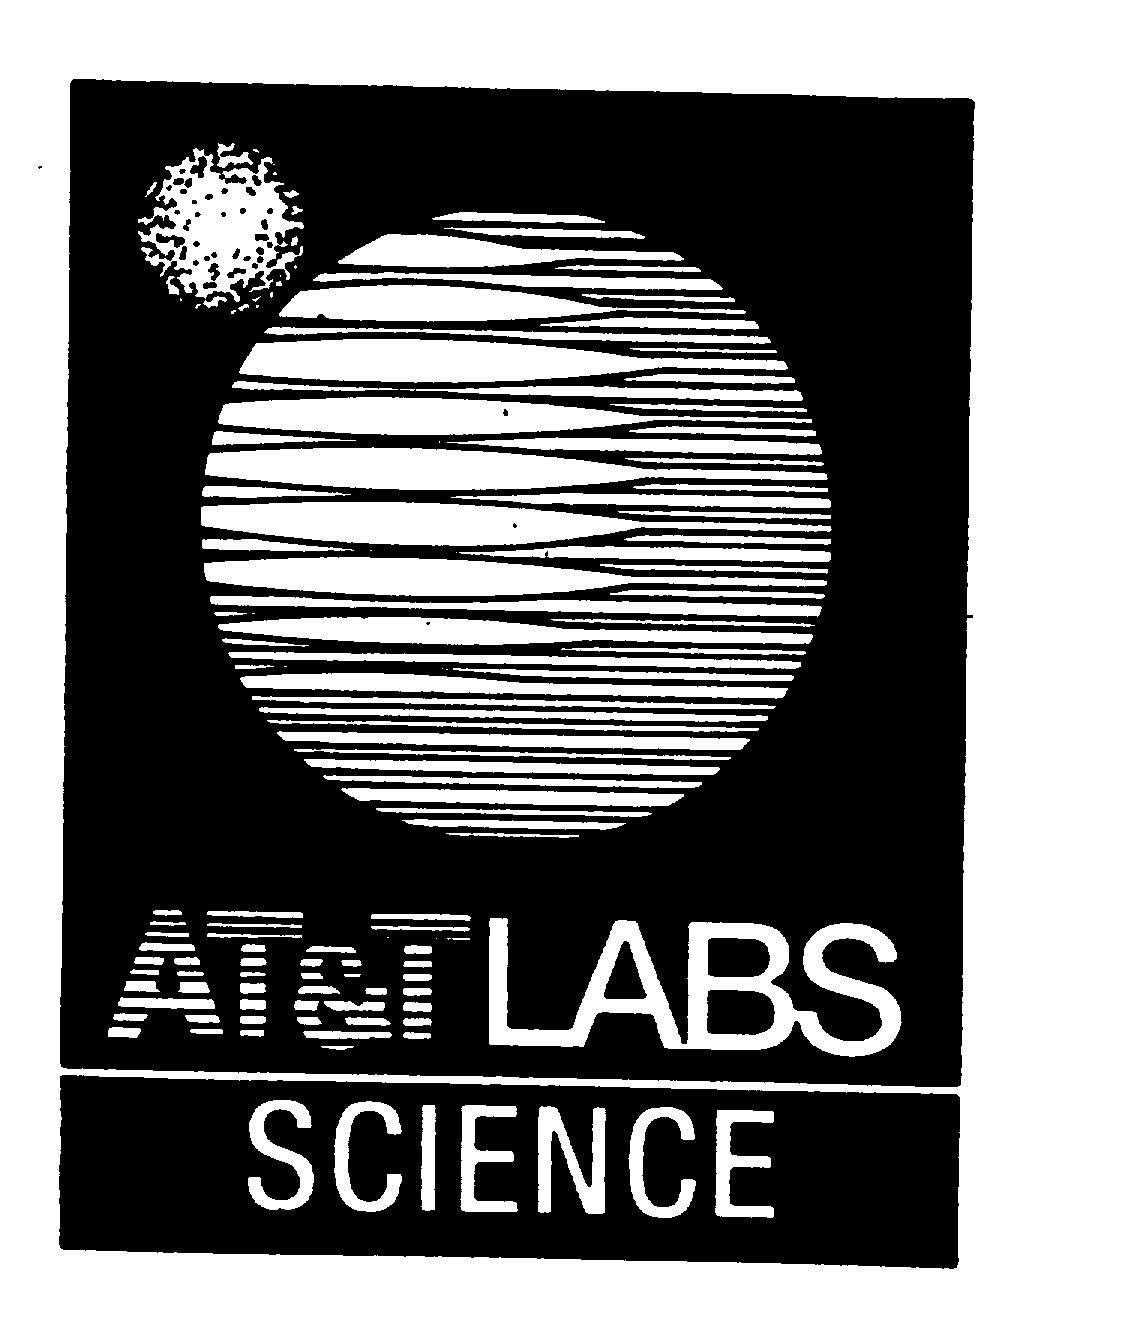  AT&amp;T LABS SCIENCE